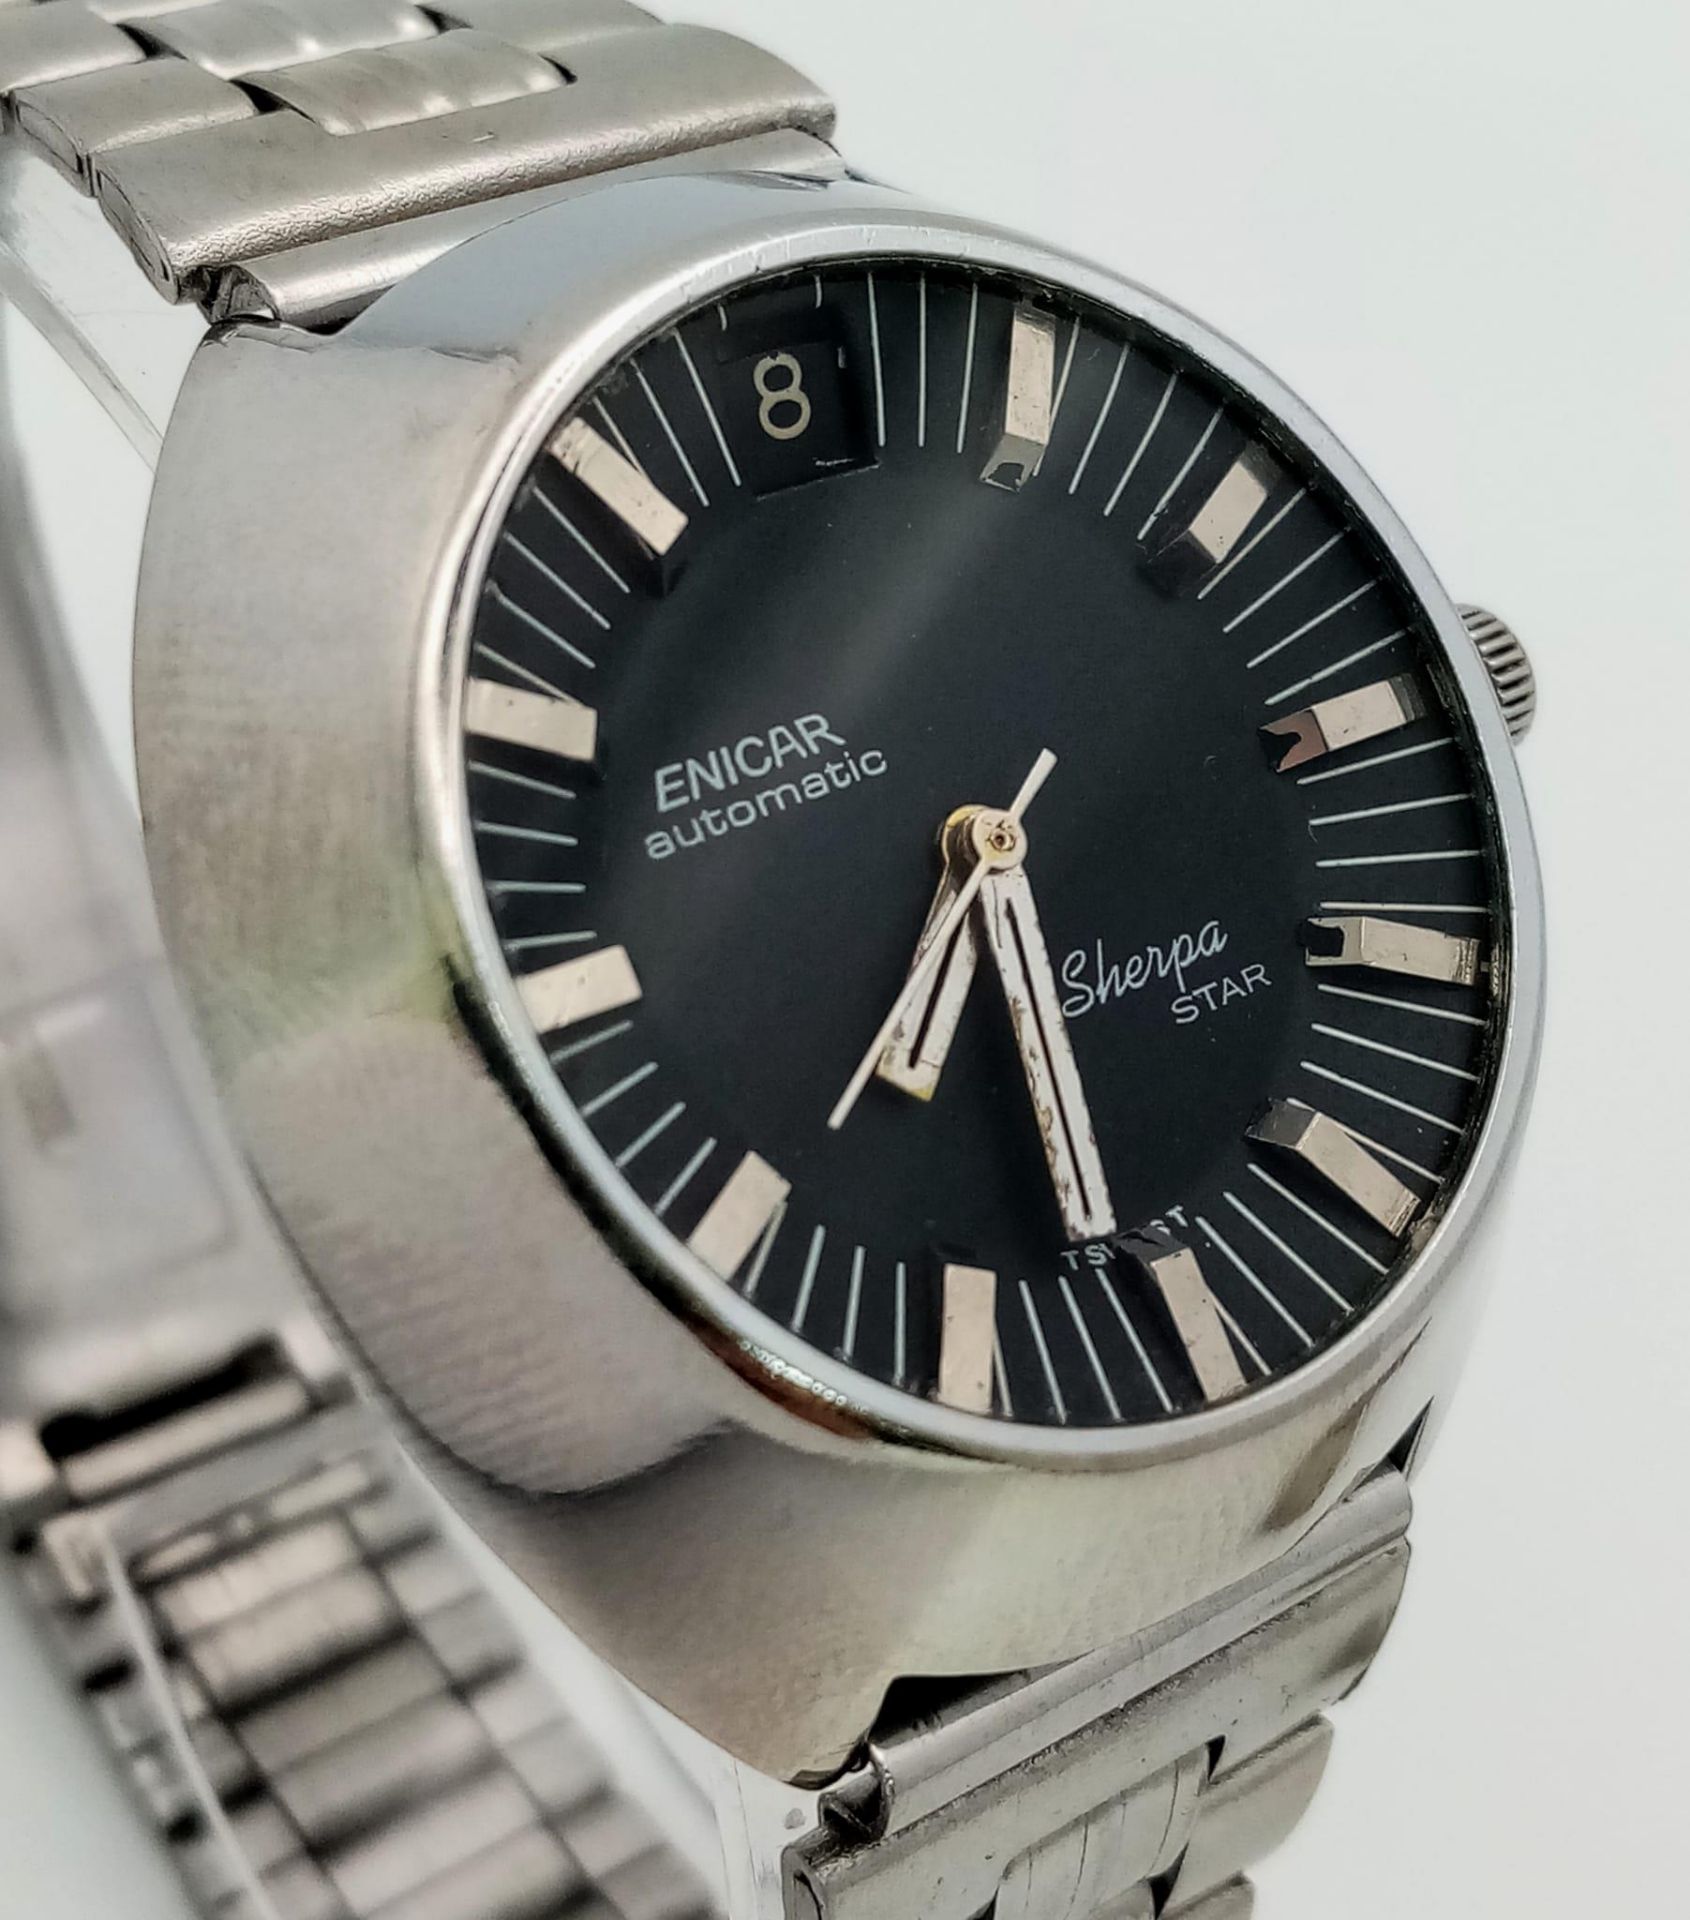 A Very Rare Enicar Sherpa Automatic Gents Watch. Stainless steel strap and case - 38mm. Black dial - Bild 2 aus 8